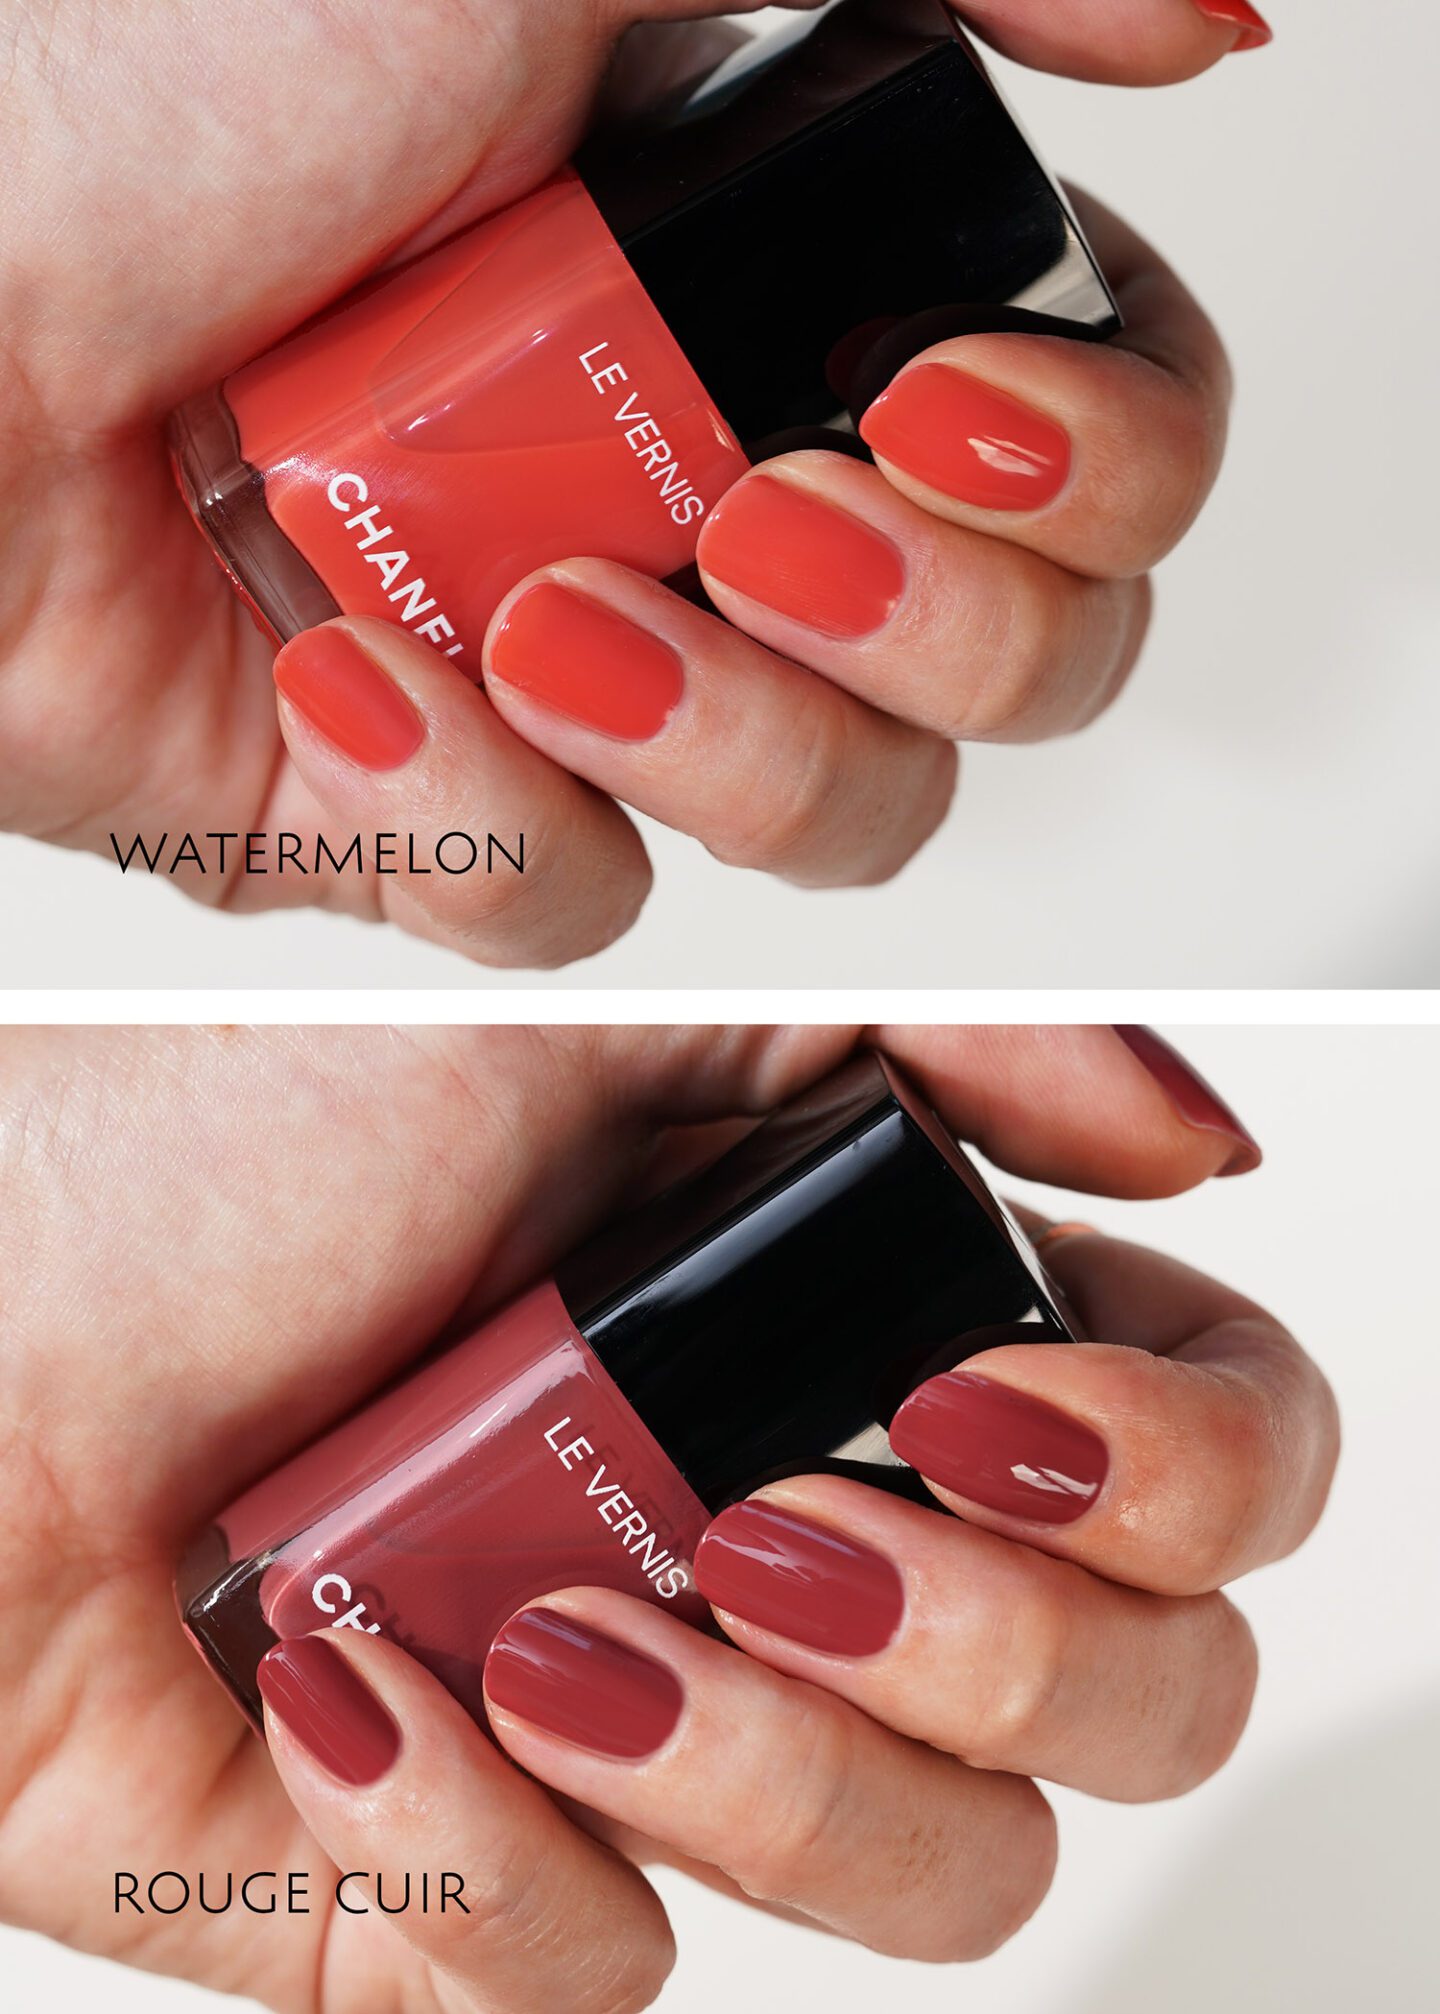 Chanel Le Vernis in Rouge Cuir and Watermelon